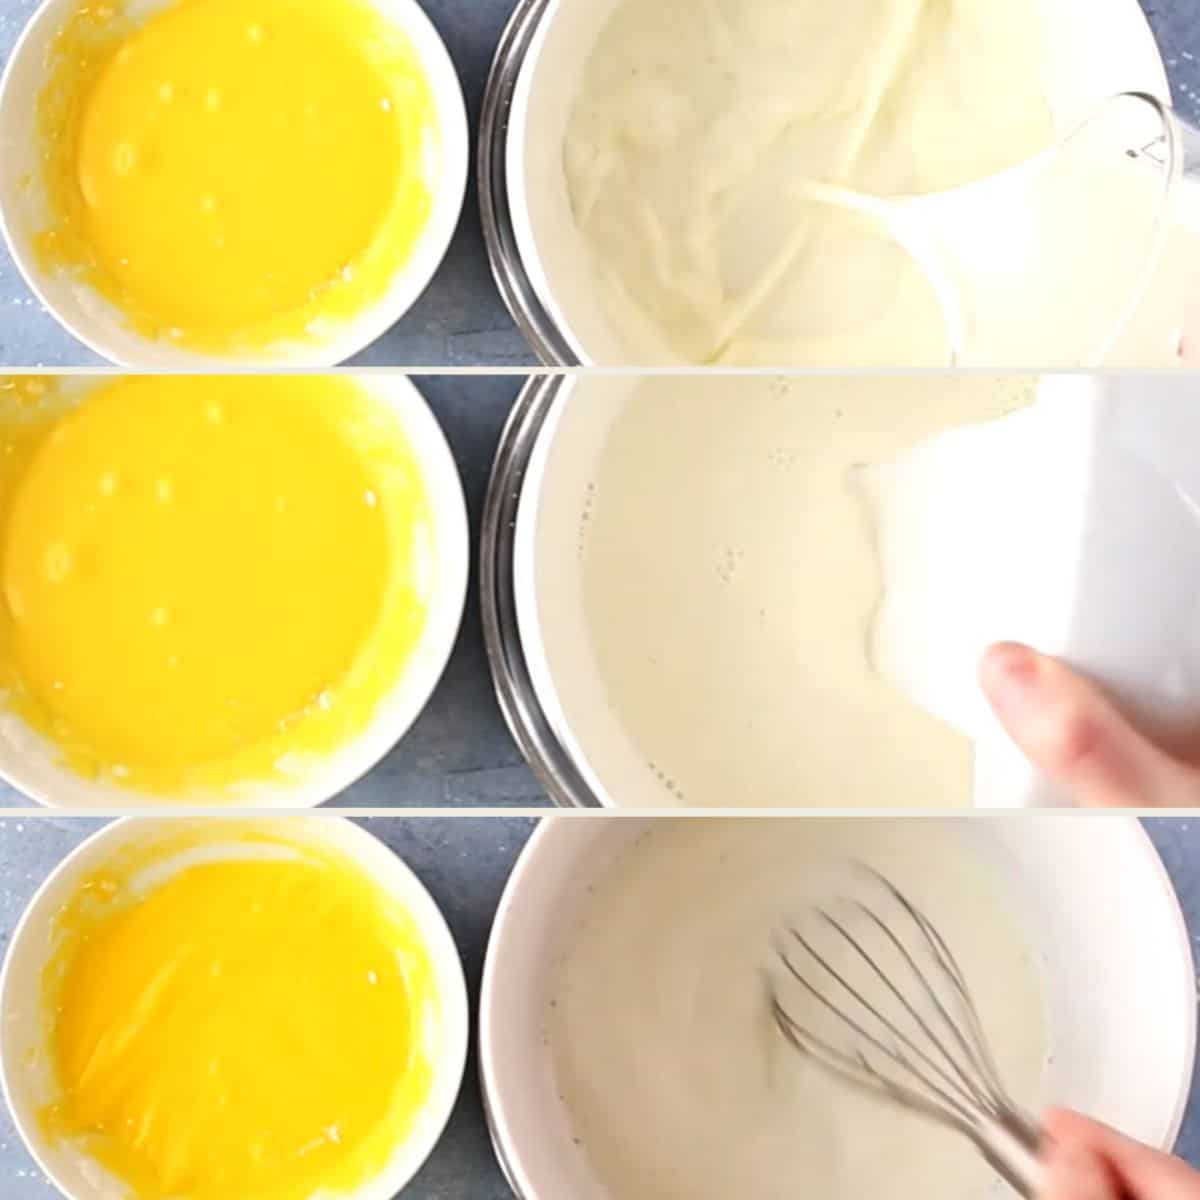 whisk the egg yolks and cornstarch